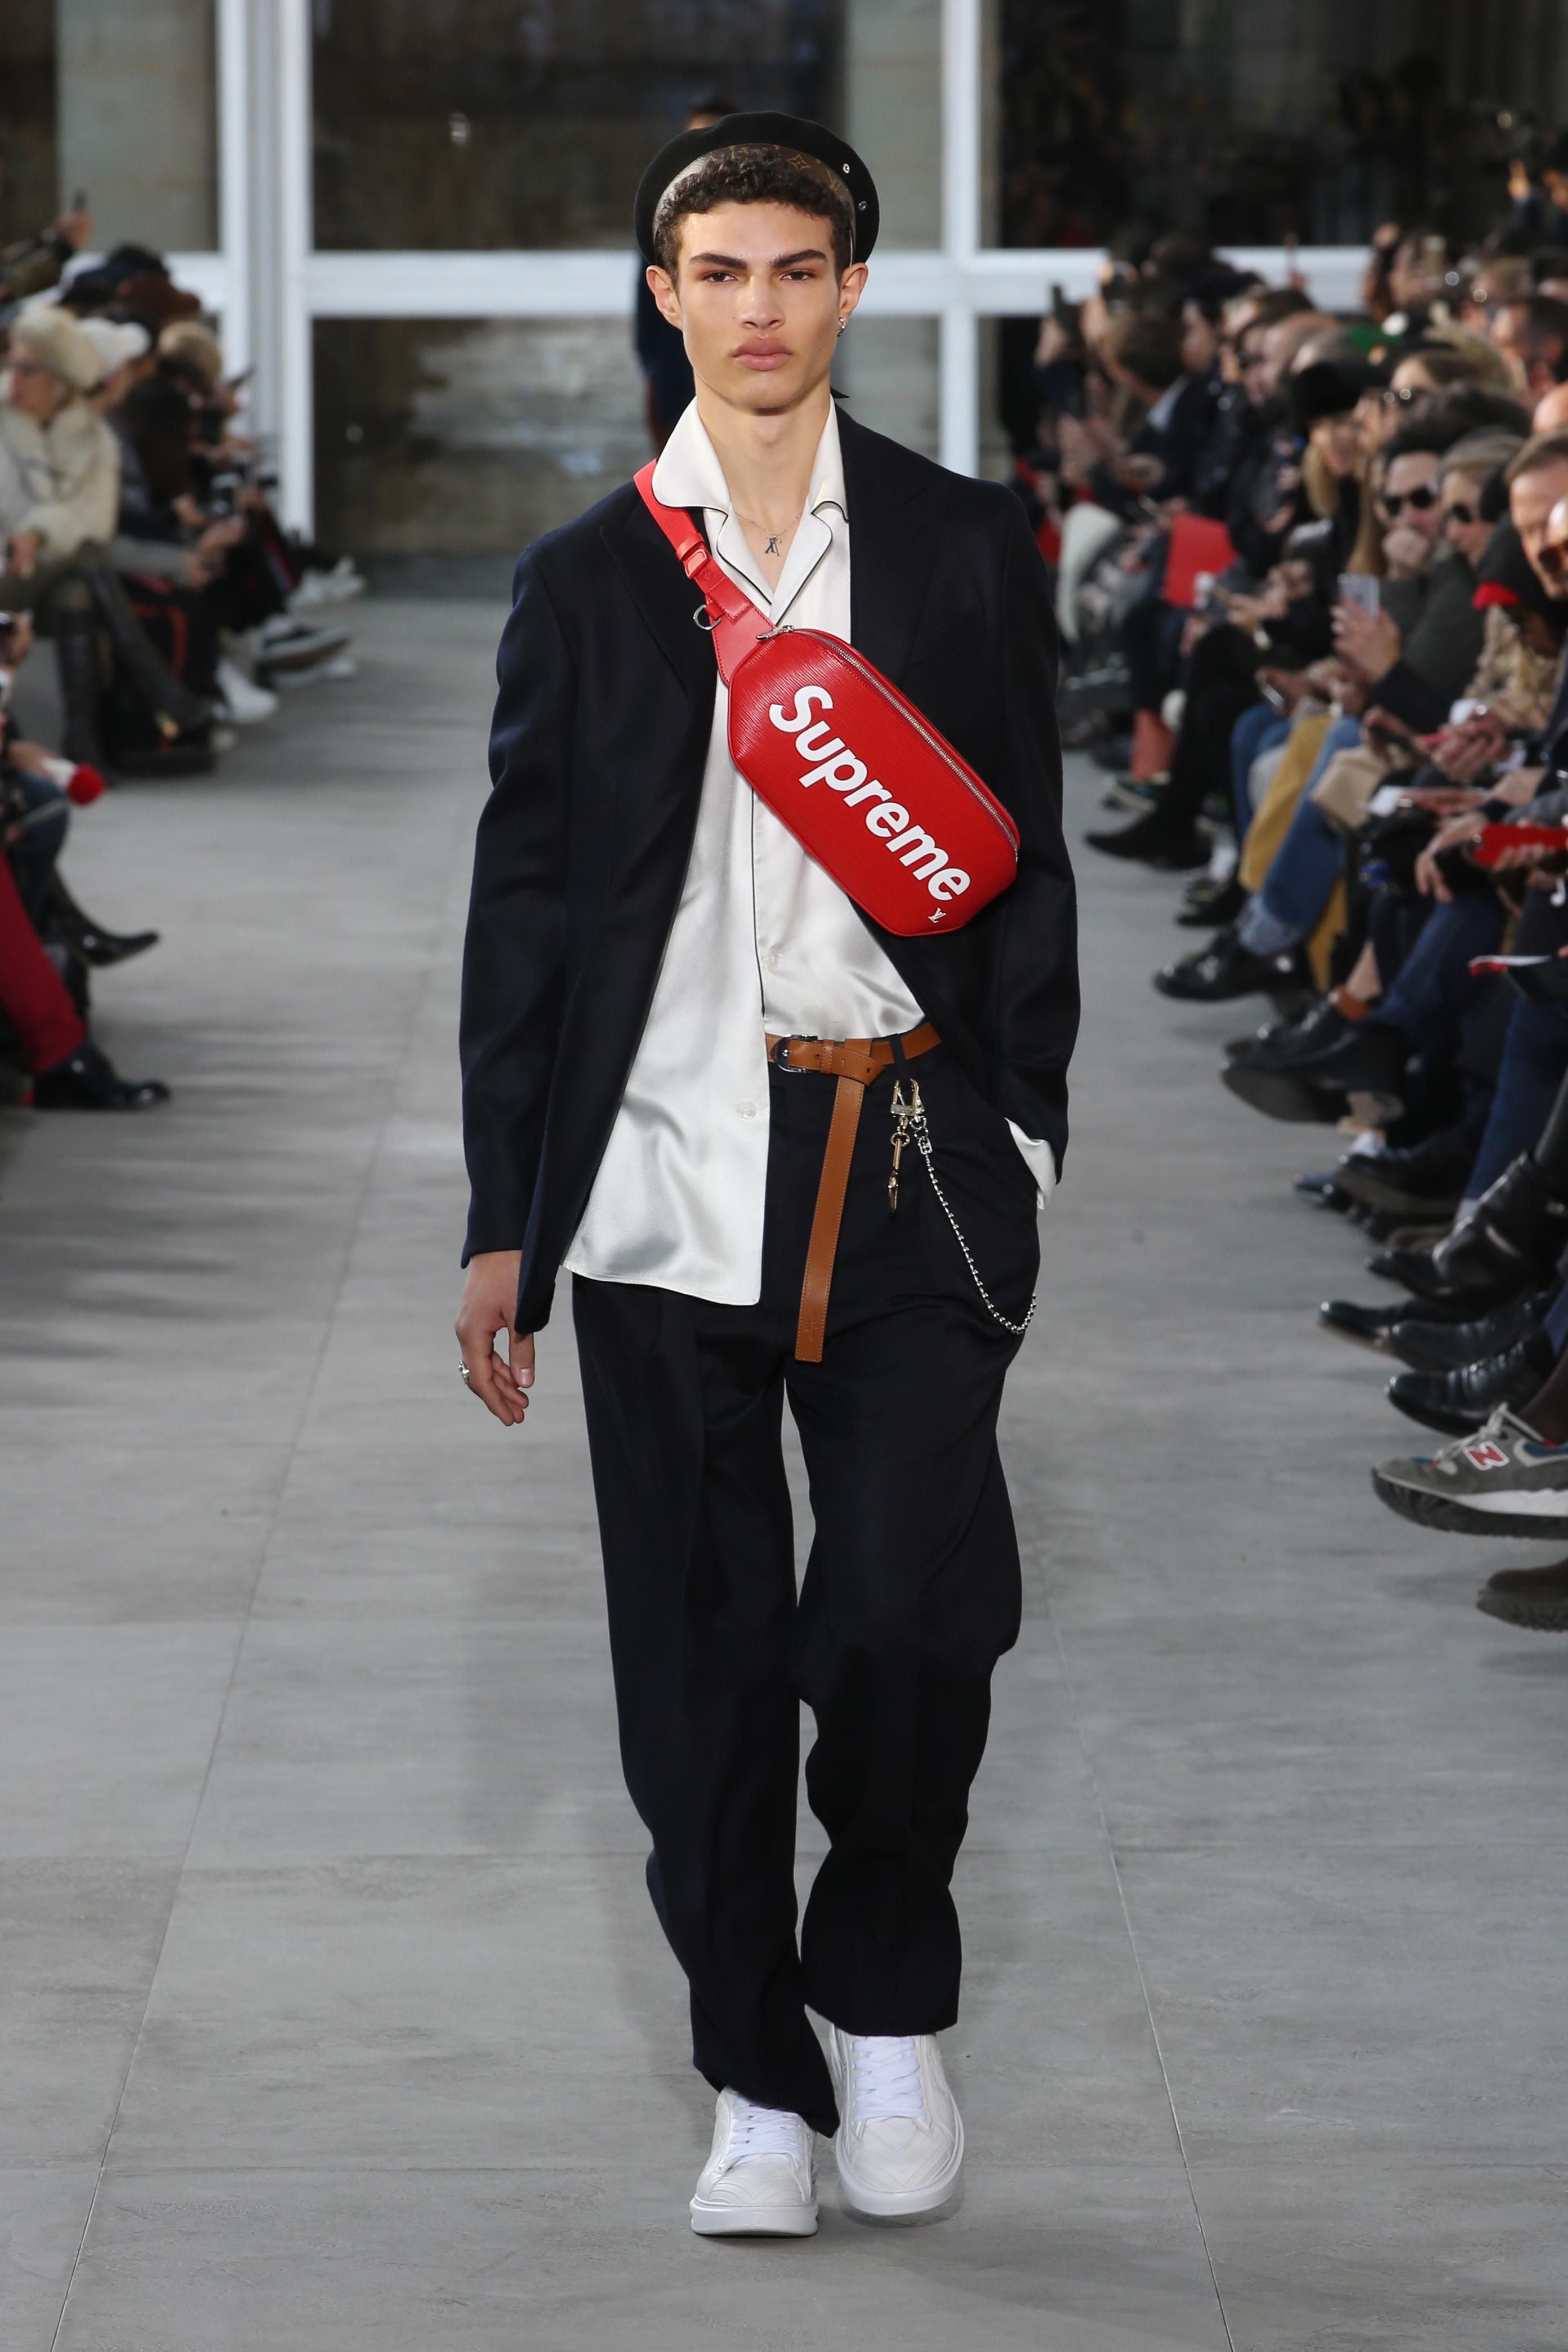 Everything you need to know about the Supreme Louis Vuitton